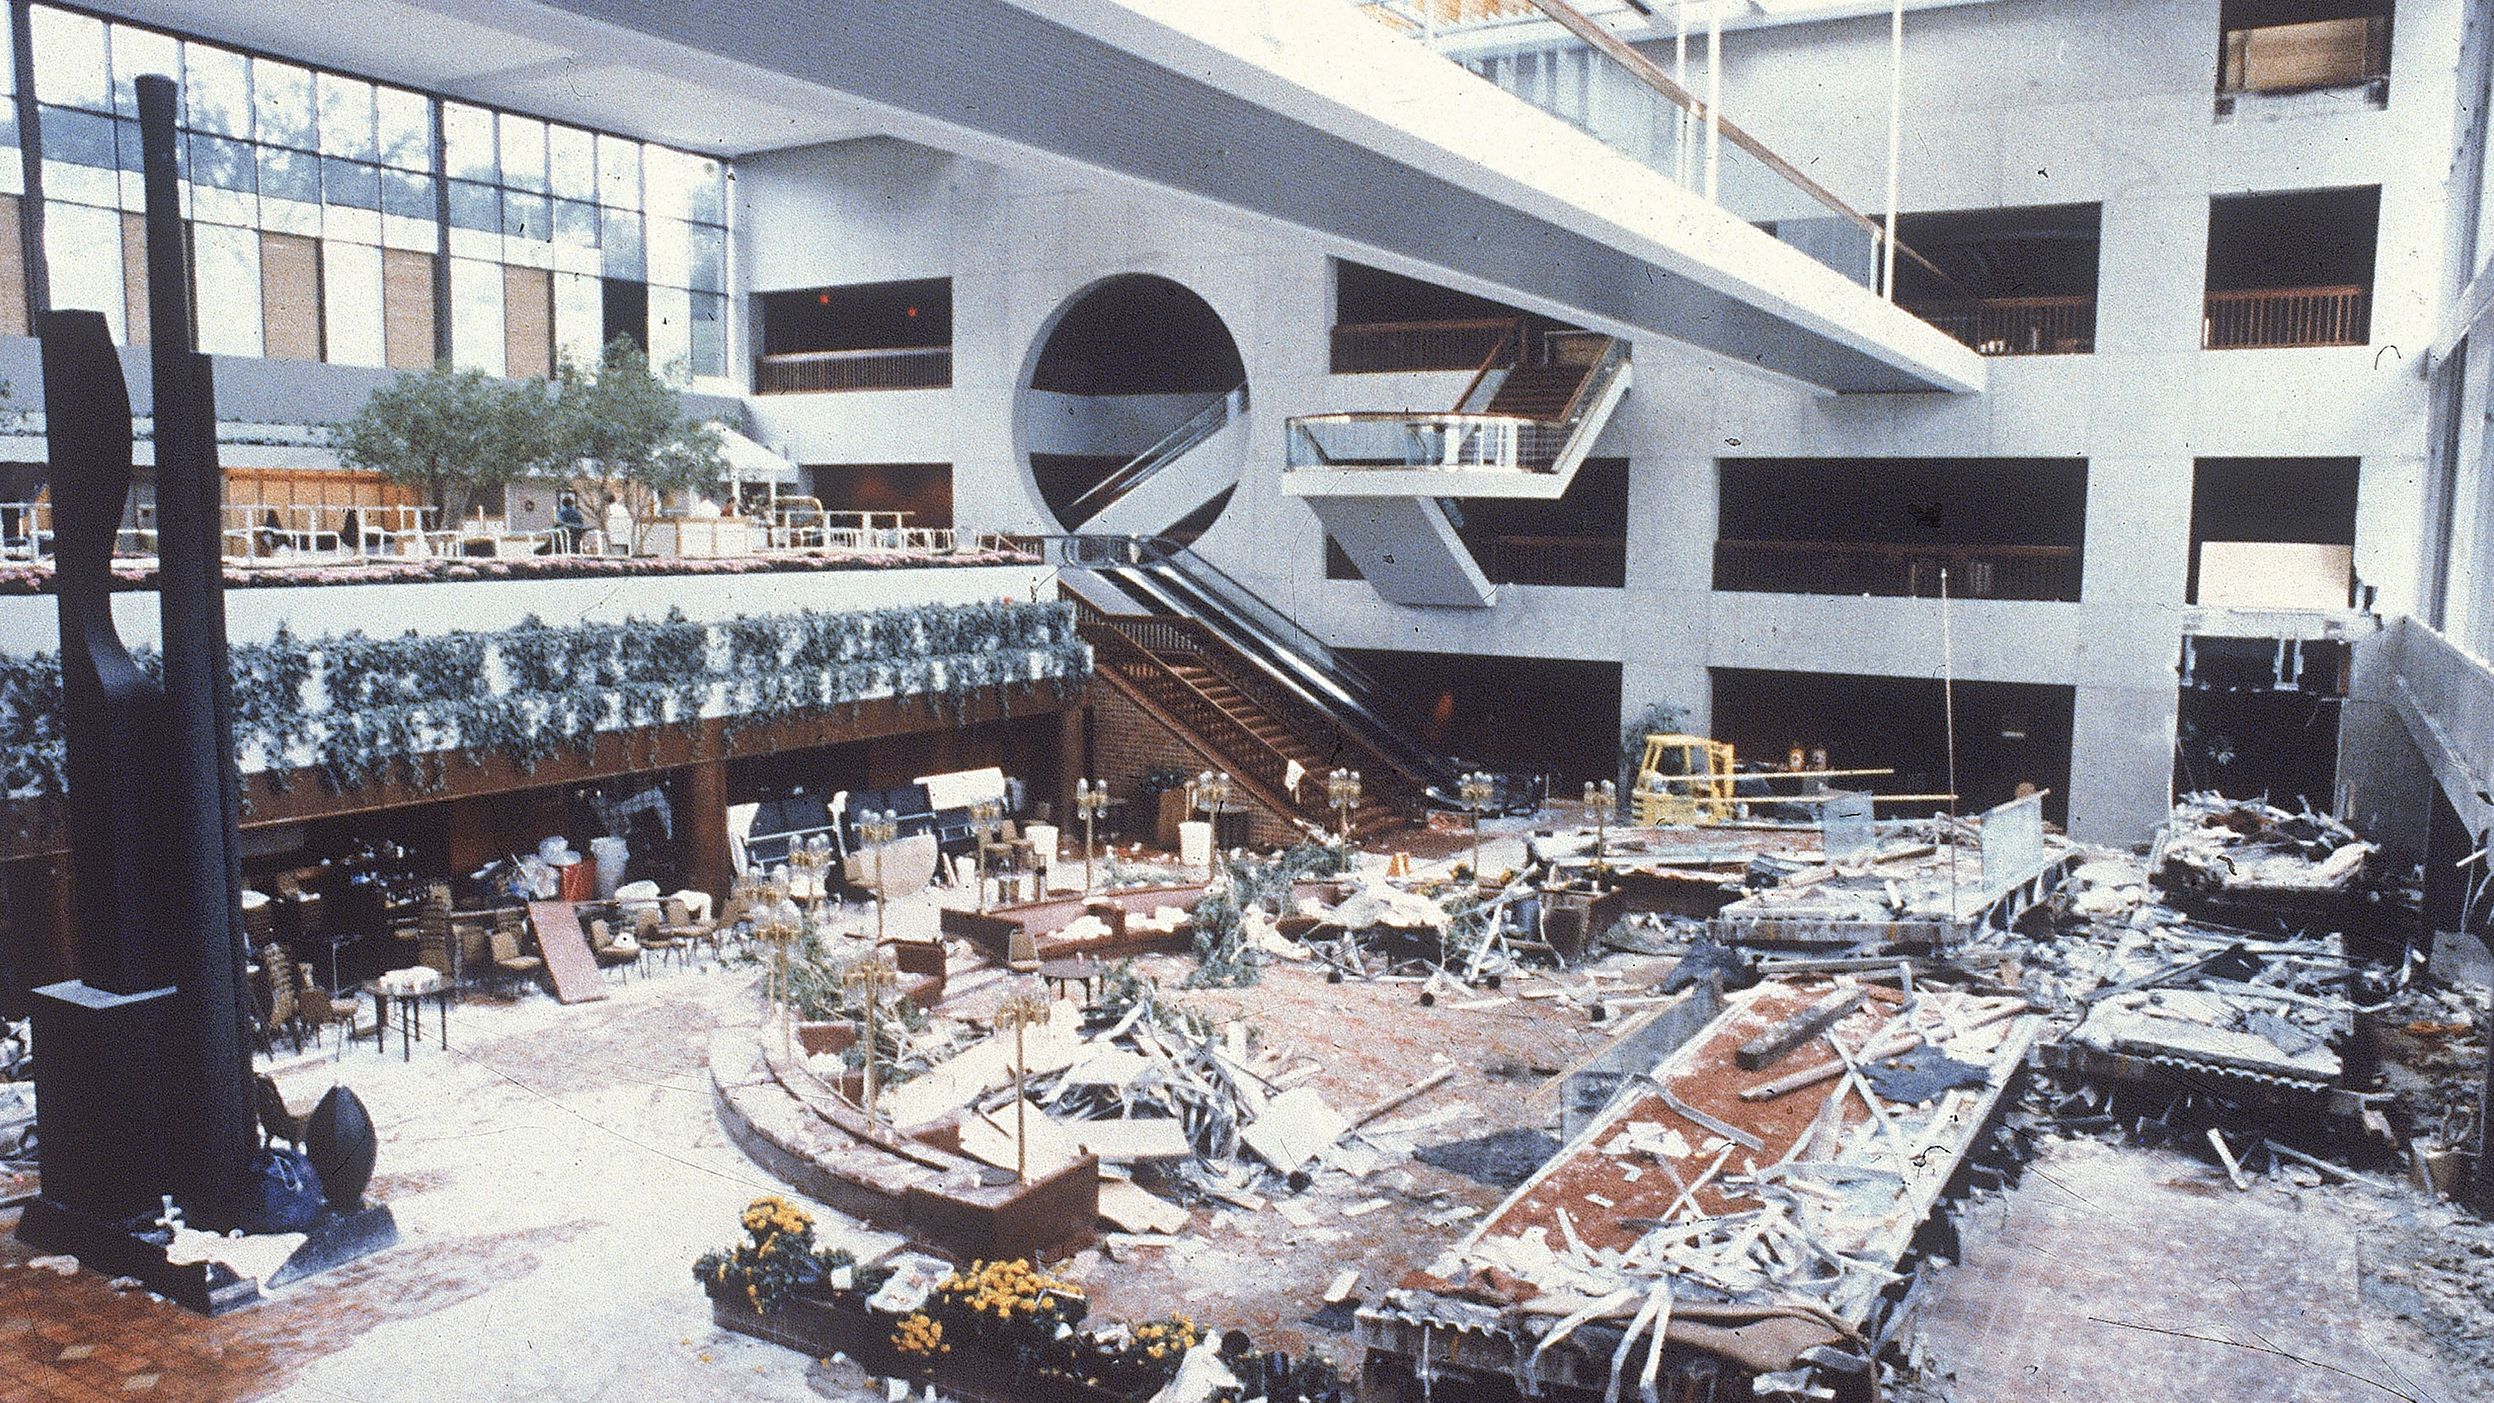 Two skywalks that spanned the second and fourth floors of the Hyatt Regency Hotel in Kansas City, Missouri, lie in ruins after collapsing on July 17, 1981.